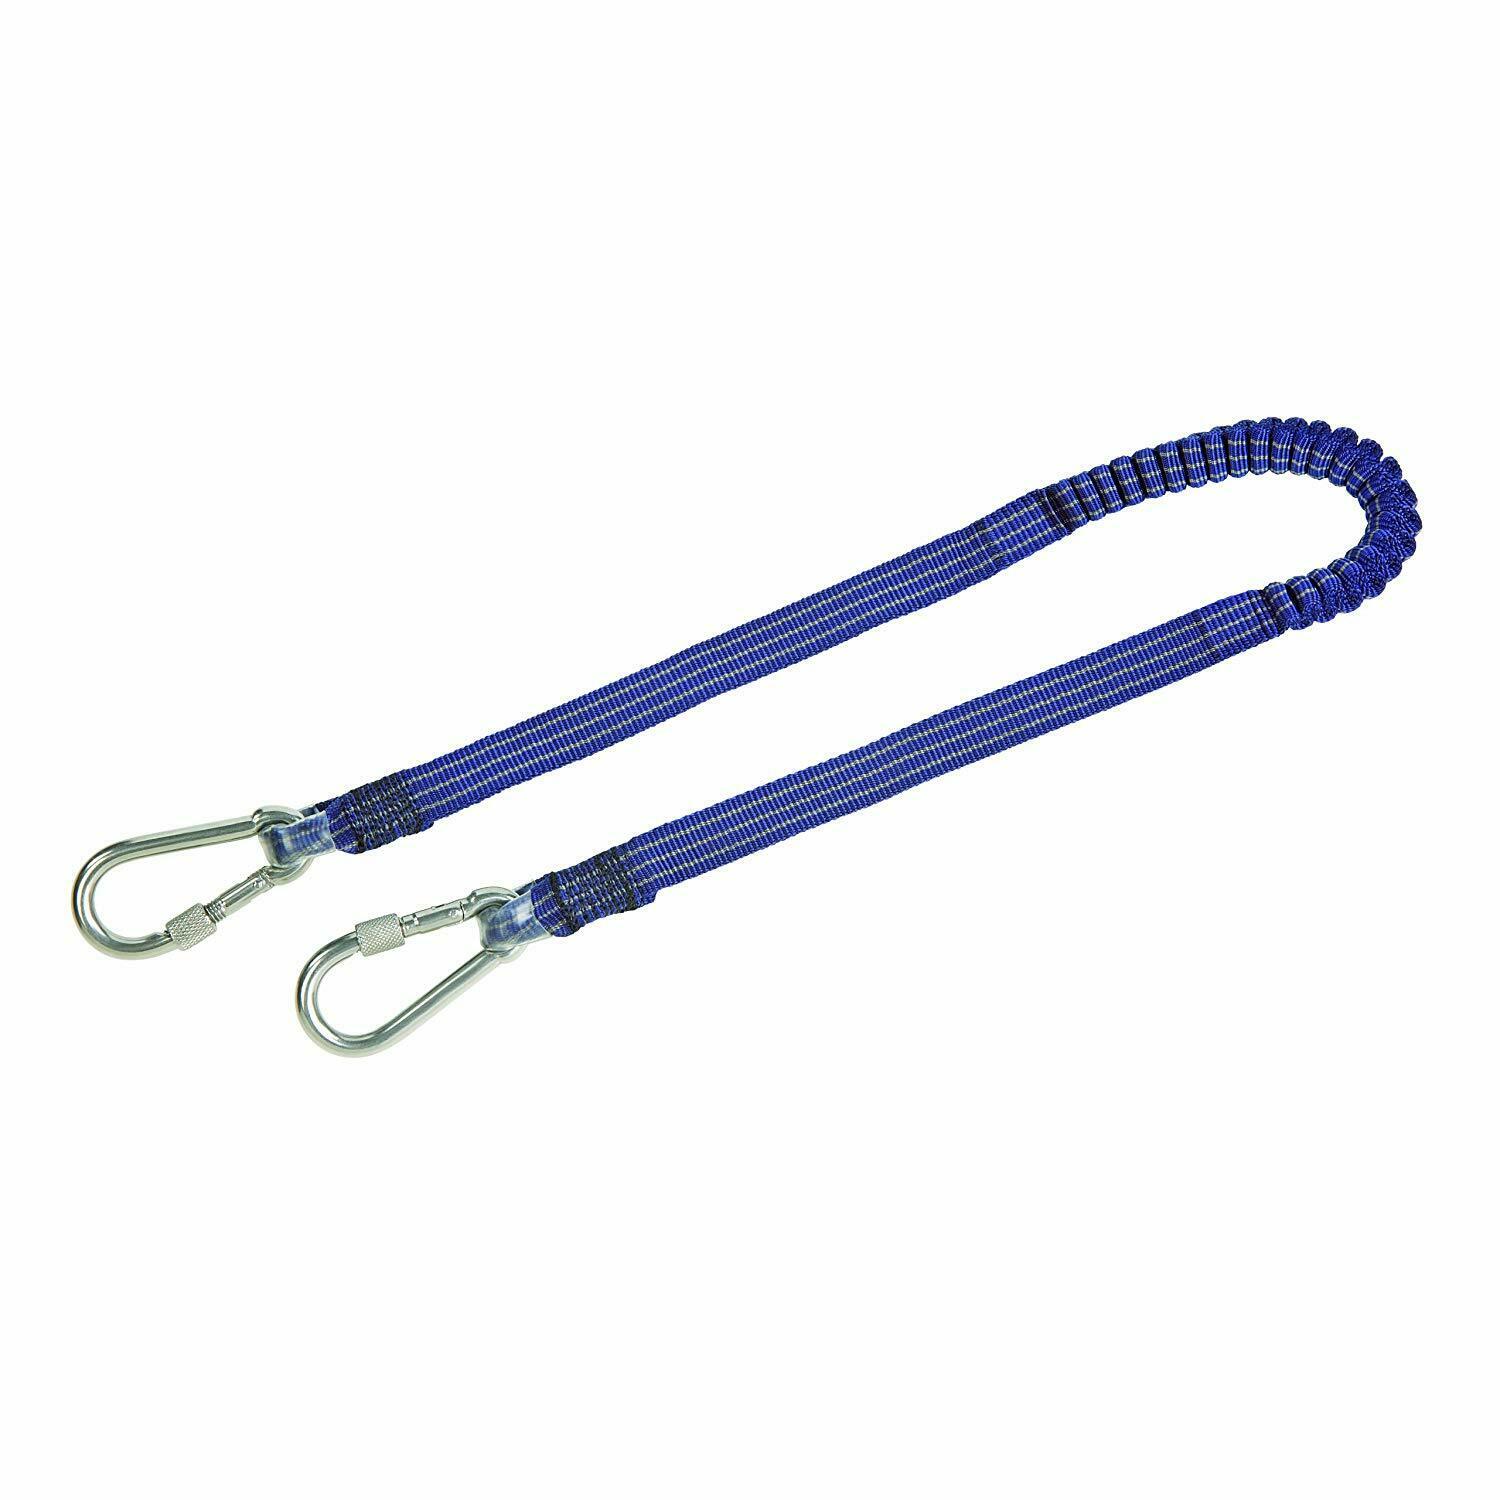 Hot New Products Tool Lanyards With Hooks - Tool lanyard,  w/Carabiner Hooks At Both Ends – Bison